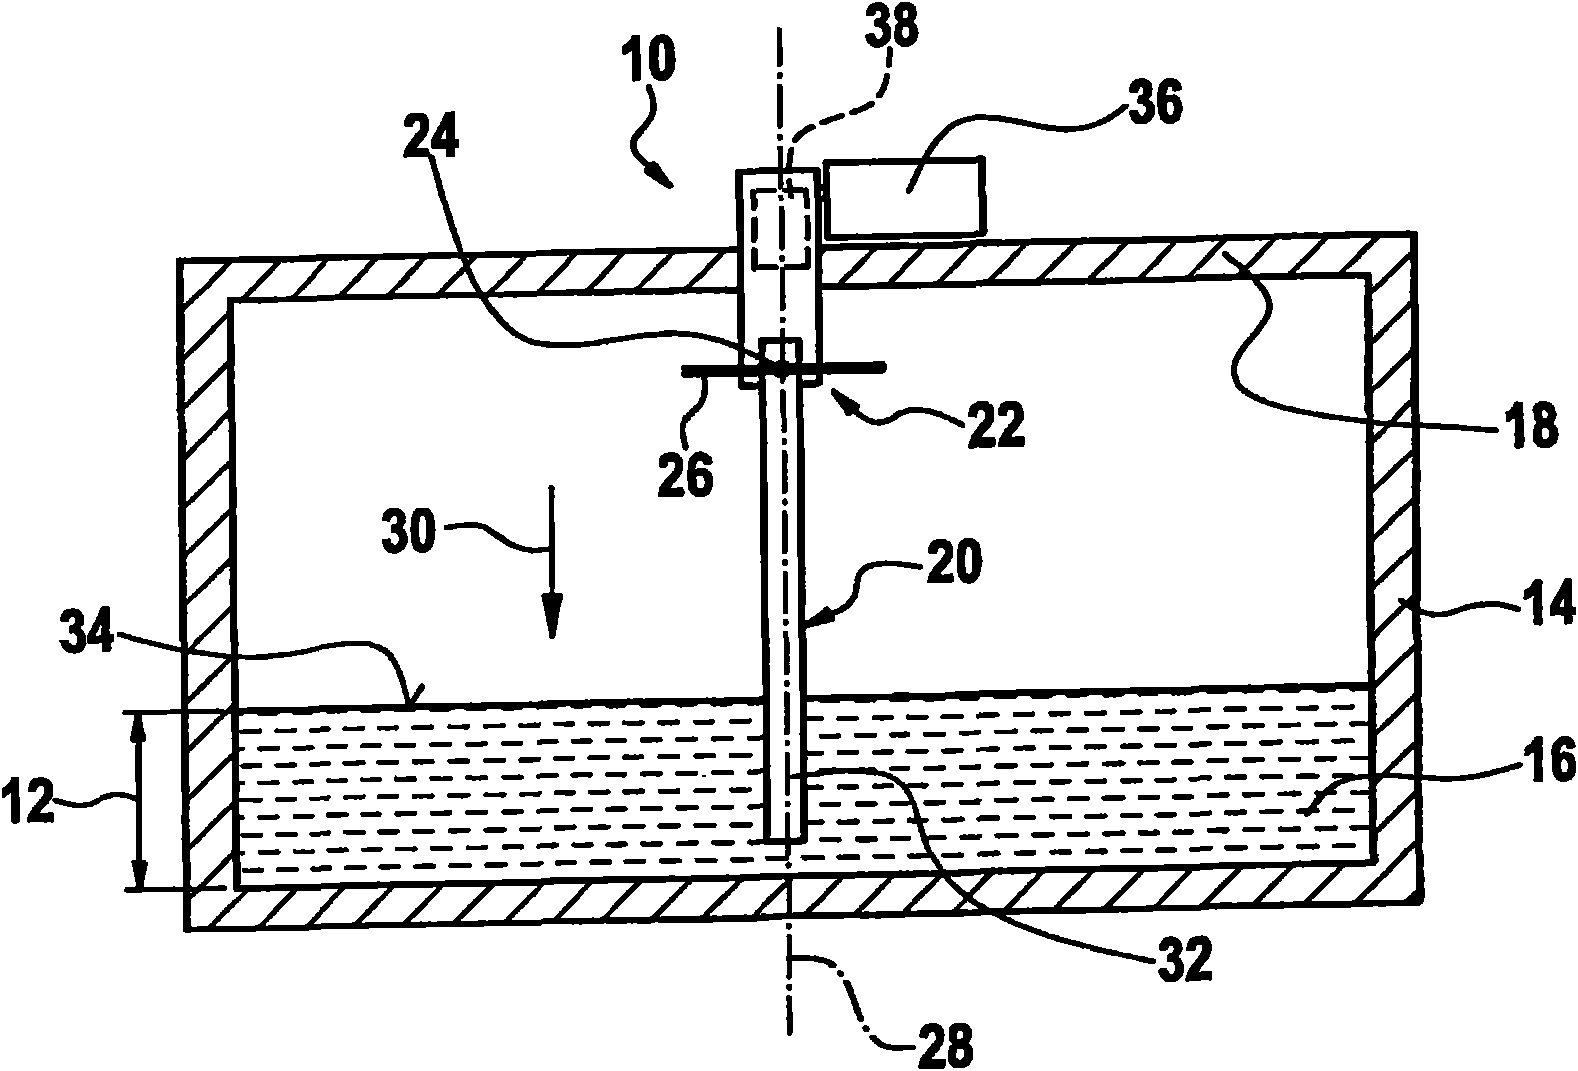 Device for measuring the fill level in a liquid container